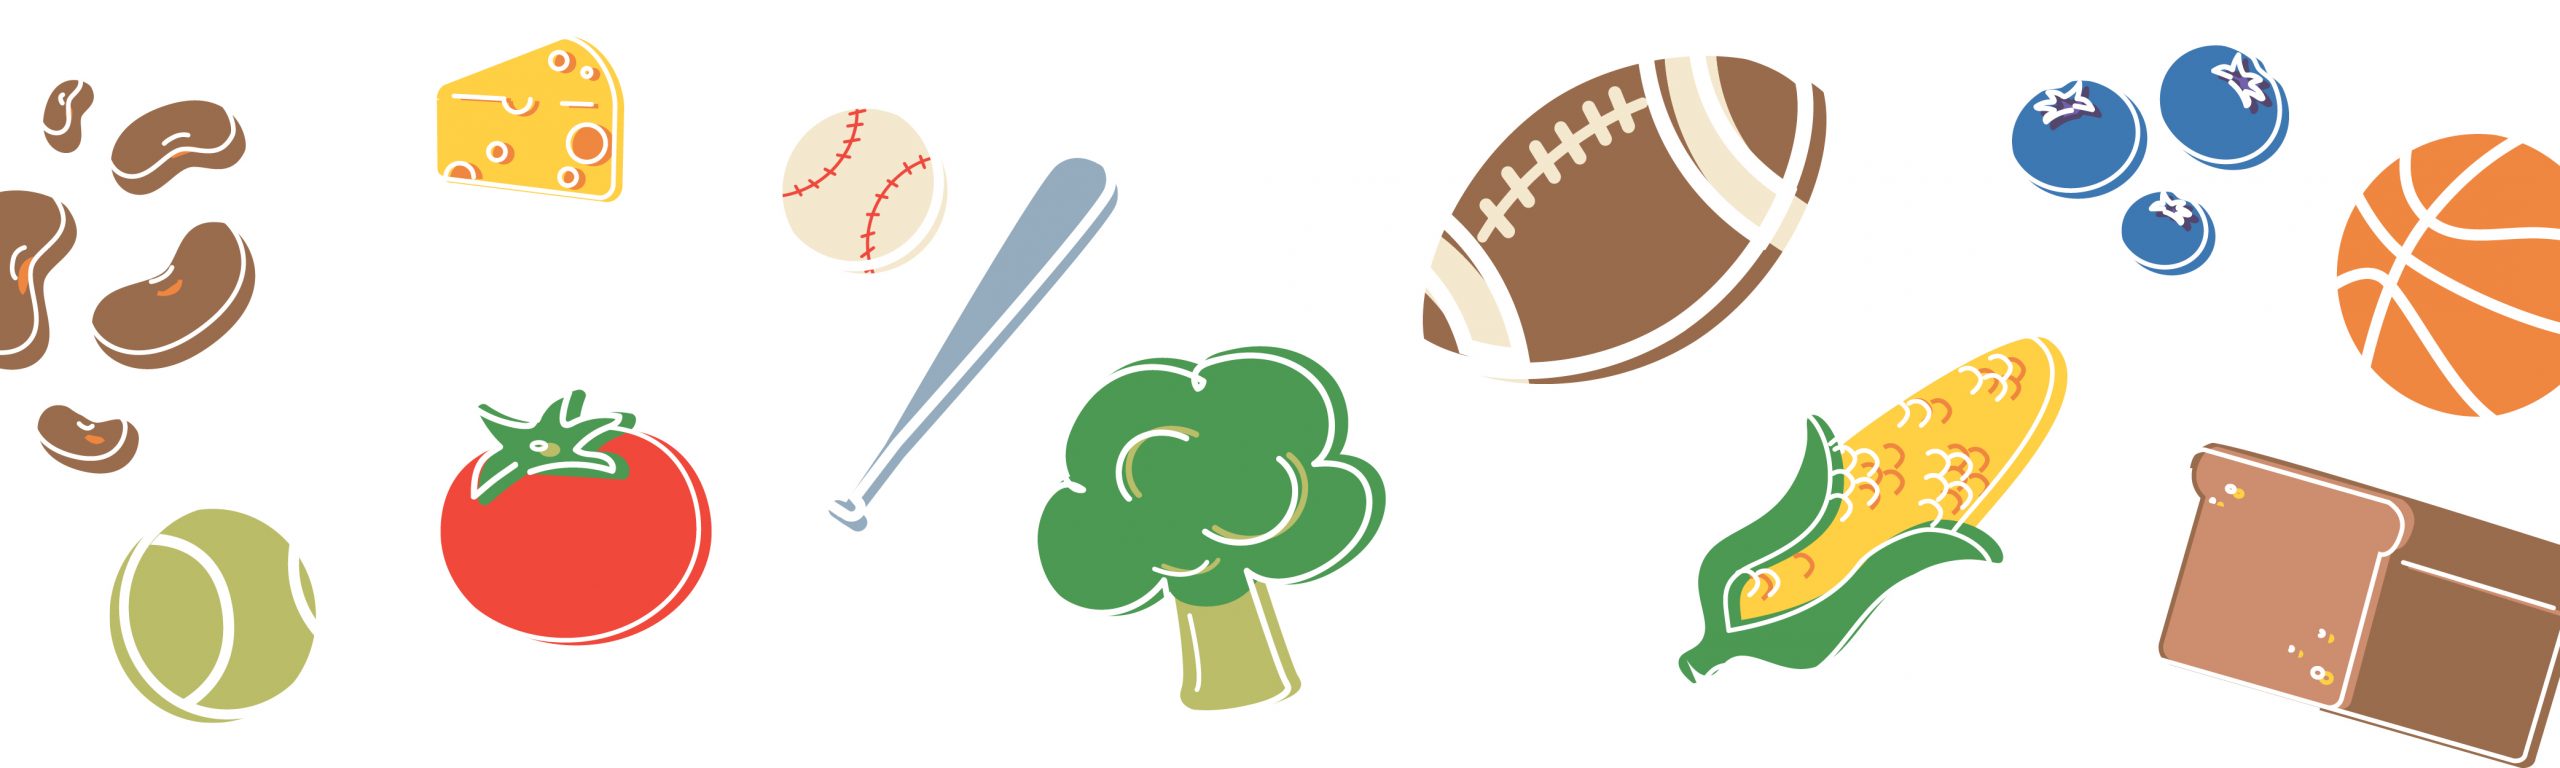 a collage of various healthy foods and sports equipment such as beans, tomatoes, broccoli, baseball, bat, football, and basketball.